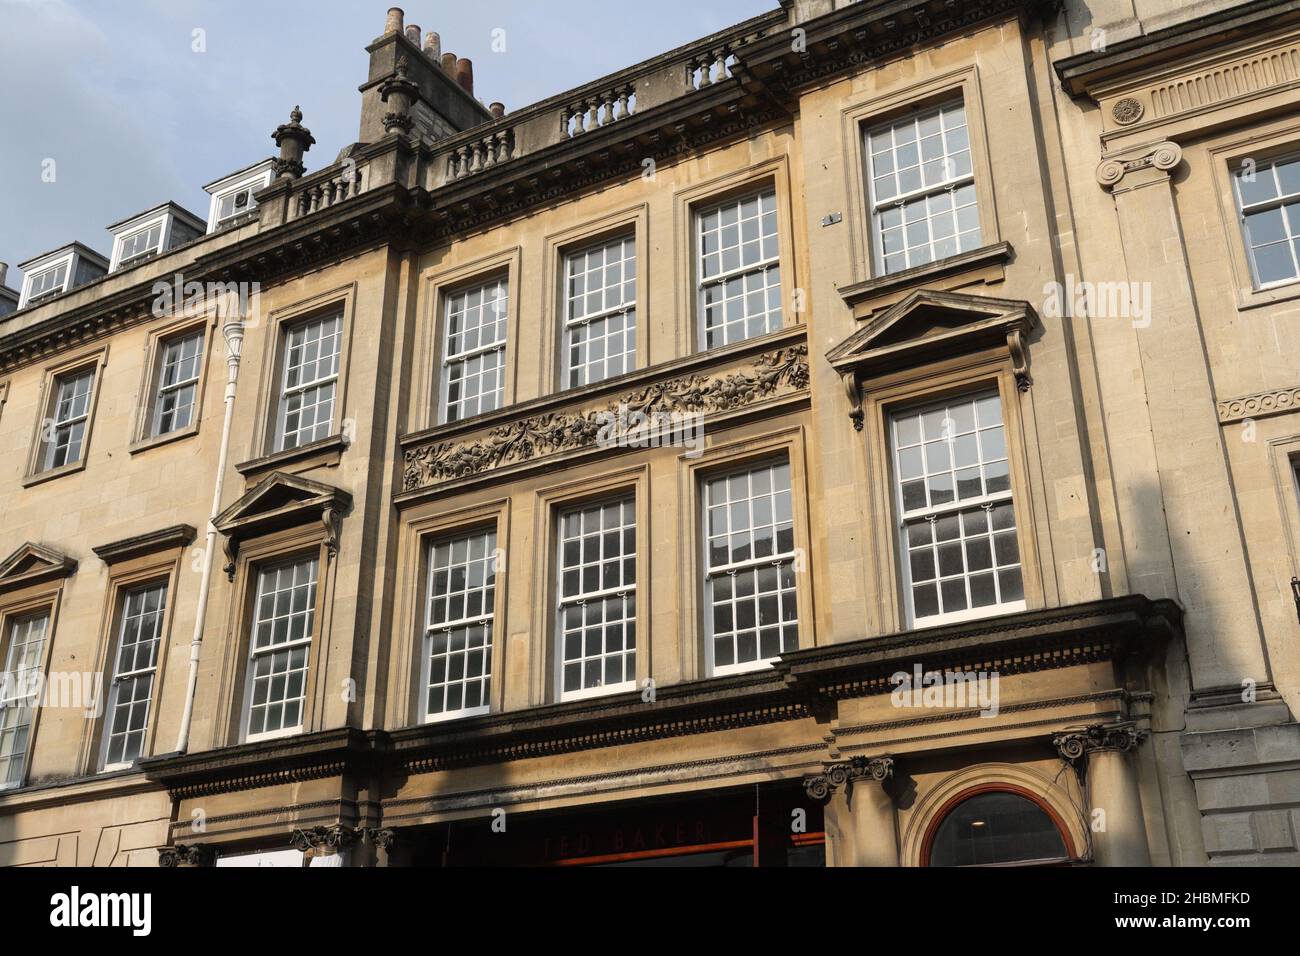 The ornate upper exterior frontage of the Octagon chapel on Milsom street in Bath England UK. Ted Baker shop. Georgian architecture Stock Photo